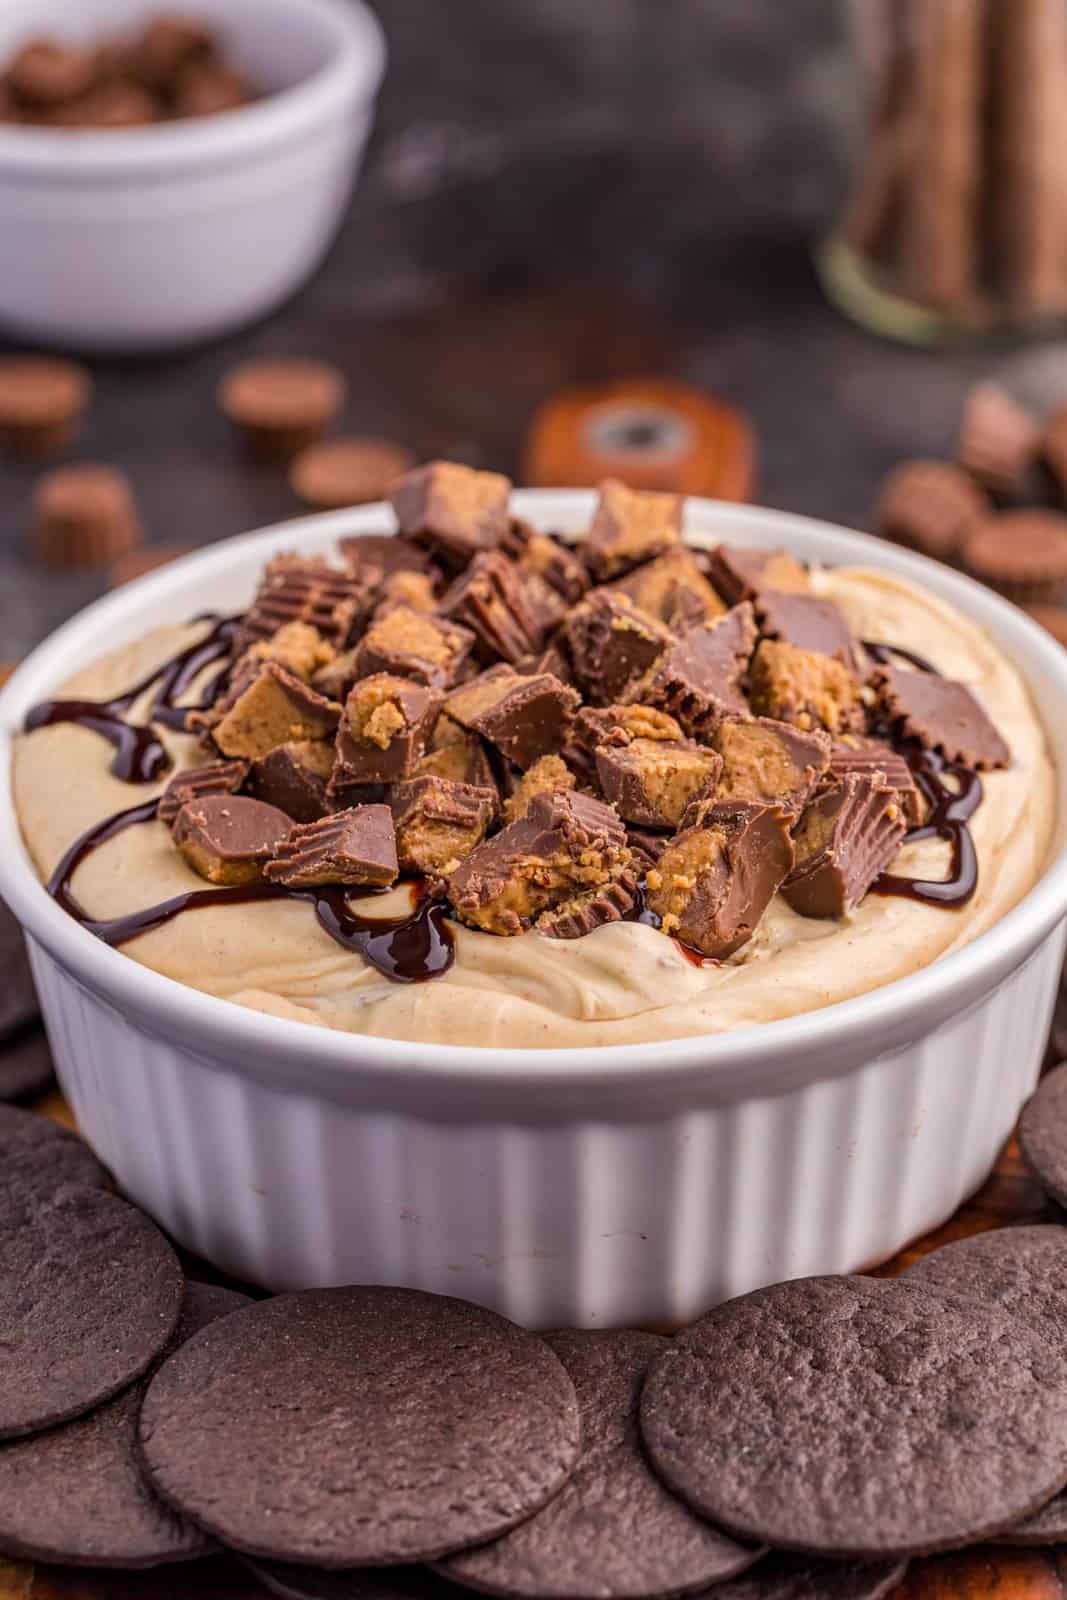 Dished up and garnished Reese's Cheesecake Dip in white bowl.